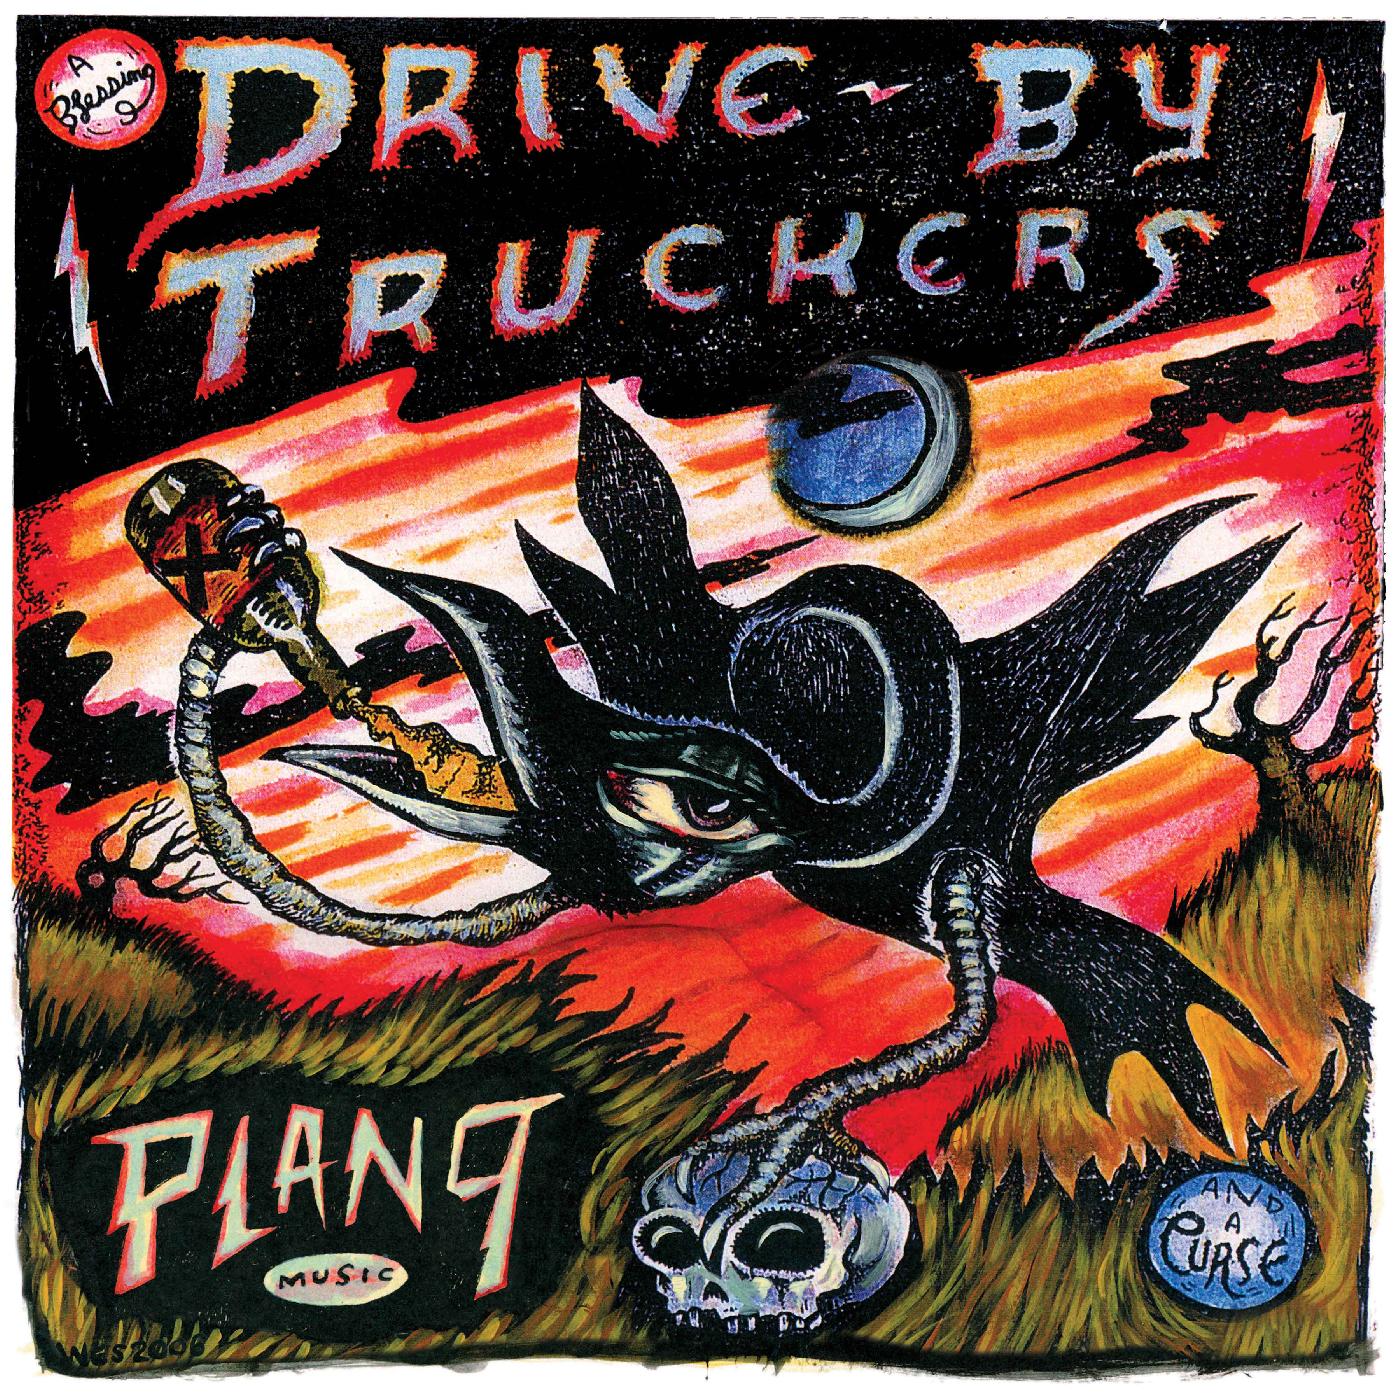 Drive-By Truckers | Plan 9 Records July 13, 2006 | Vinyl